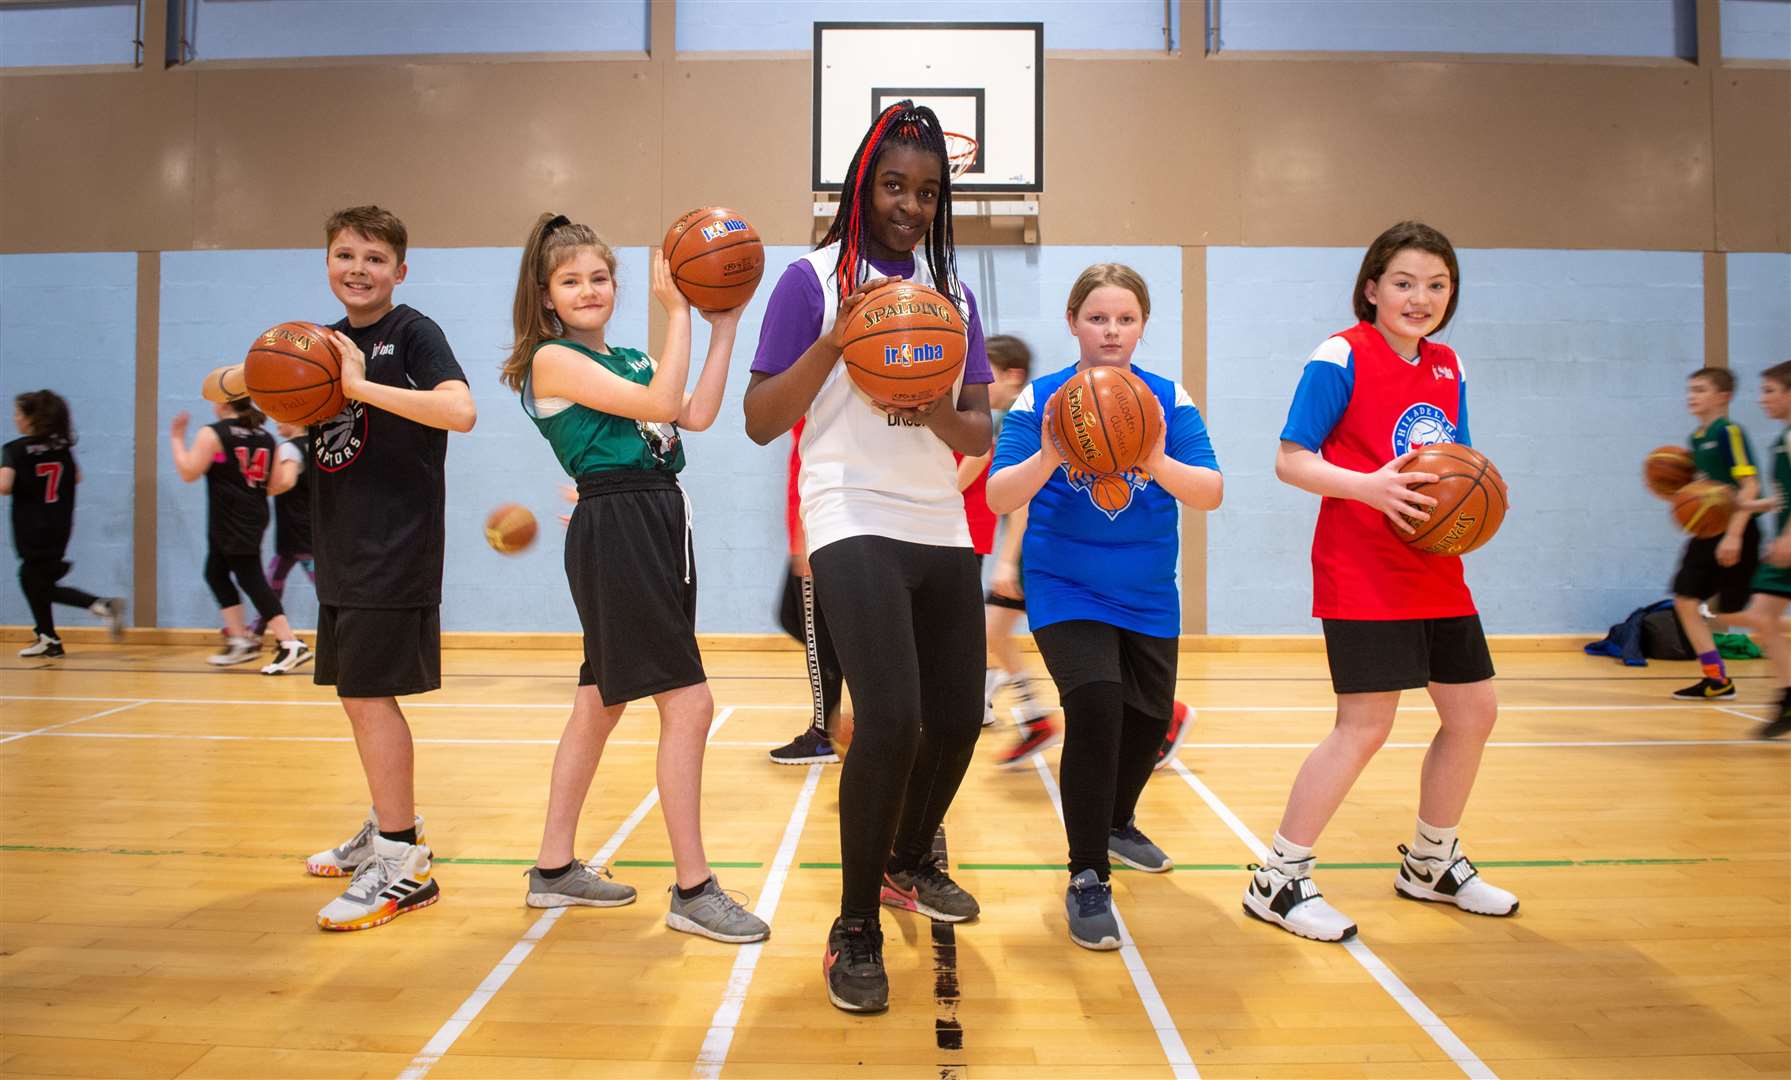 Highland Bears Basketball Club launched a training initiative with primary school kids in Inverness at Culloden Academy. They were presented with basketball strips...Modeling the new strips are Oliver Lamont, Julka Szewczak, Hilary Ugheli, Olivia Brechin and Charlotte Alexander...Picture: Callum Mackay..